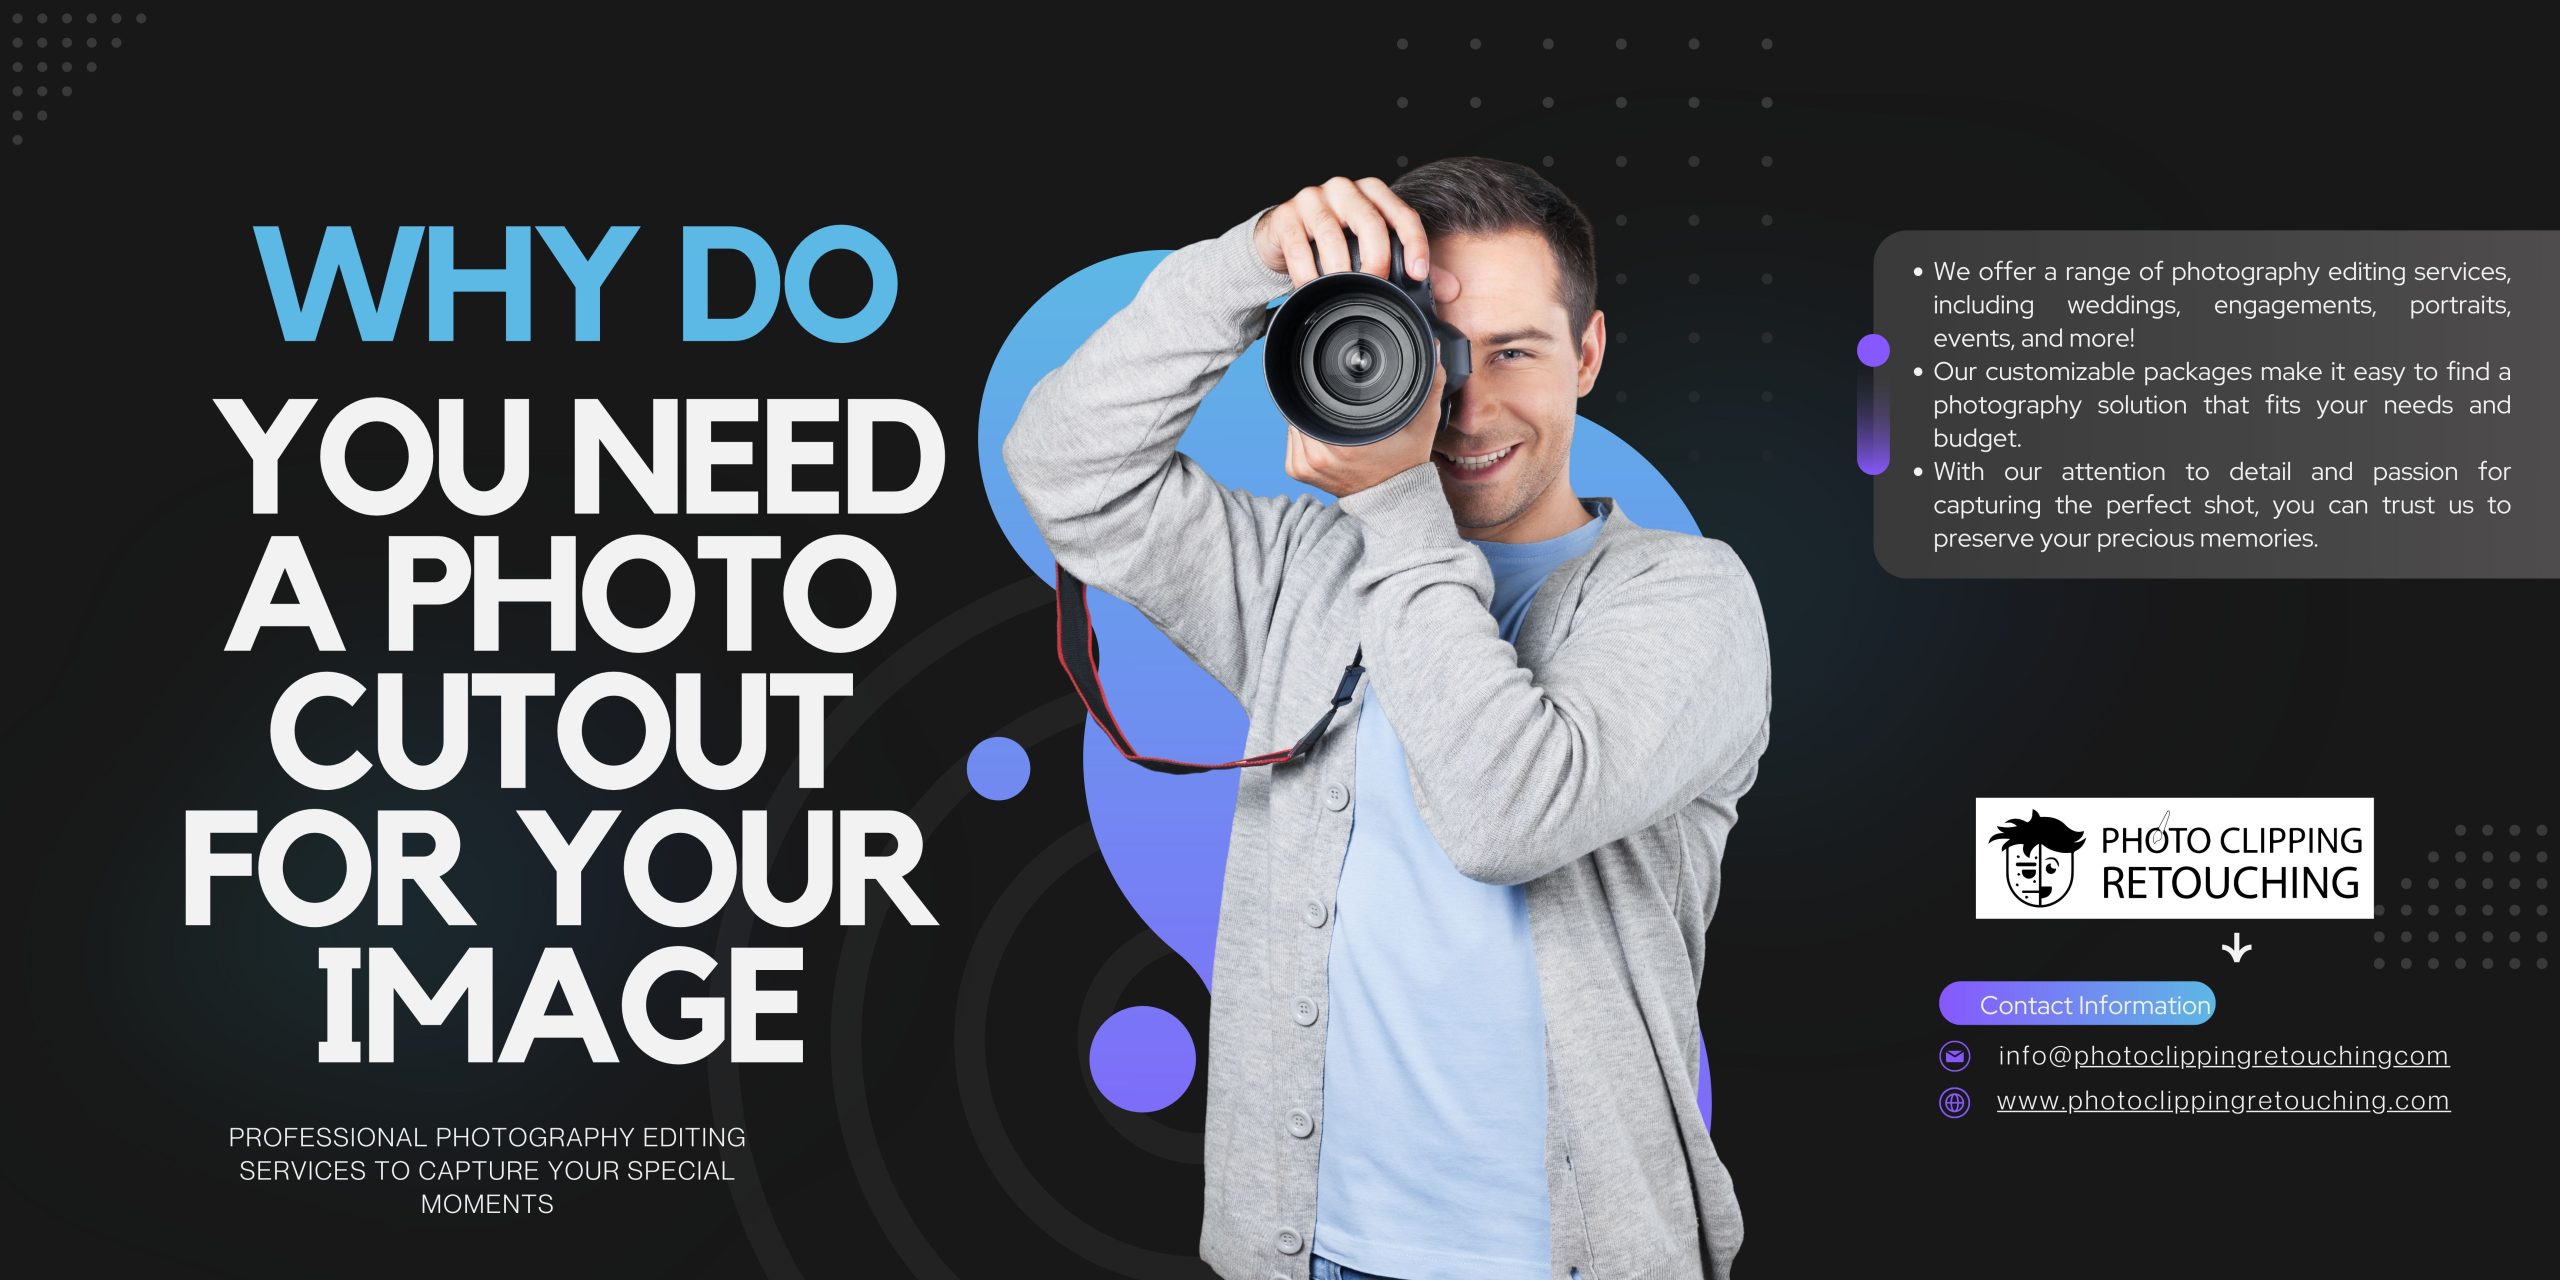 Why do you need a photo cutout for your image?